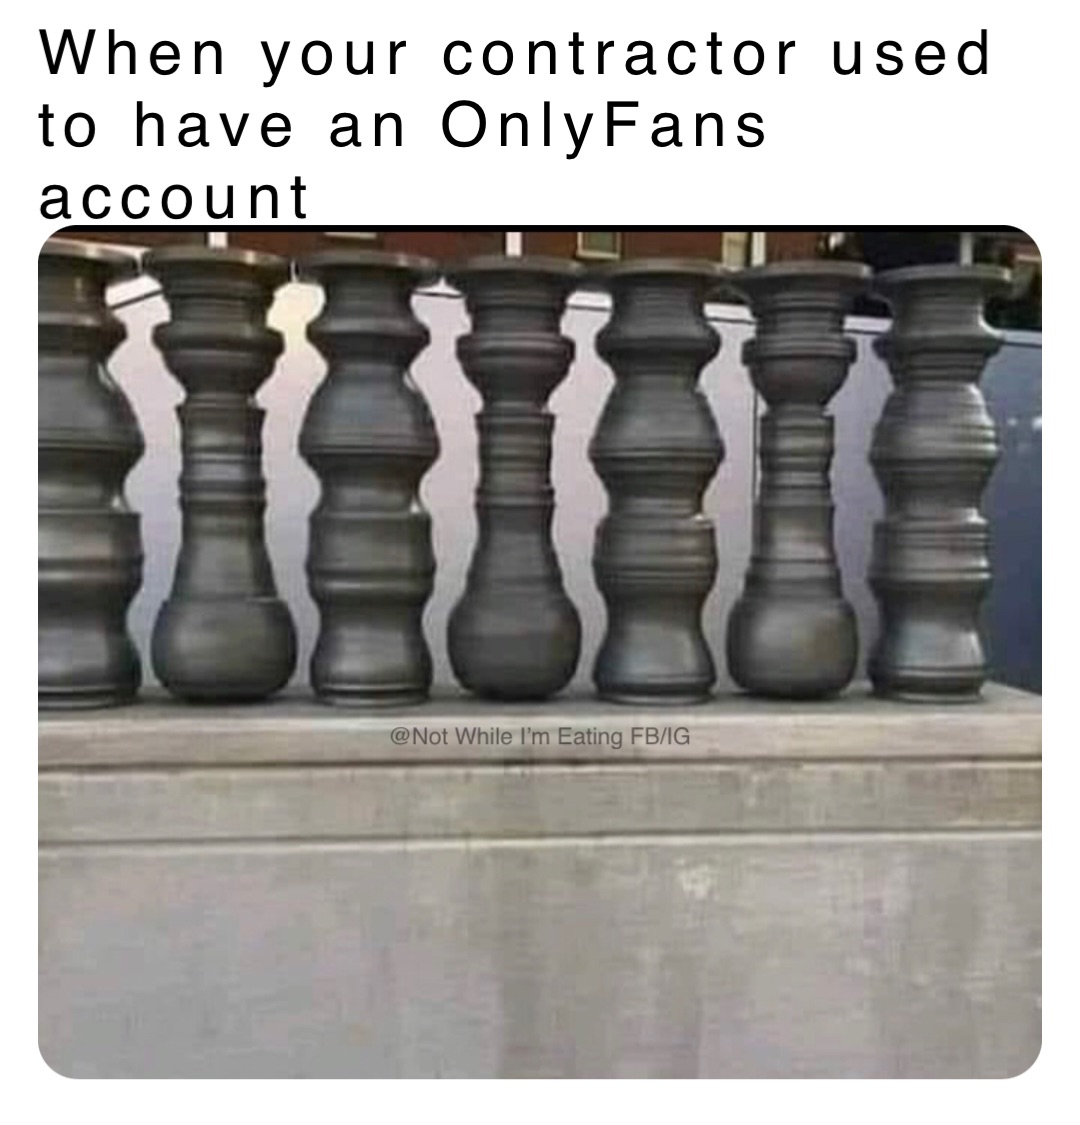 When your contractor used to have an OnlyFans account